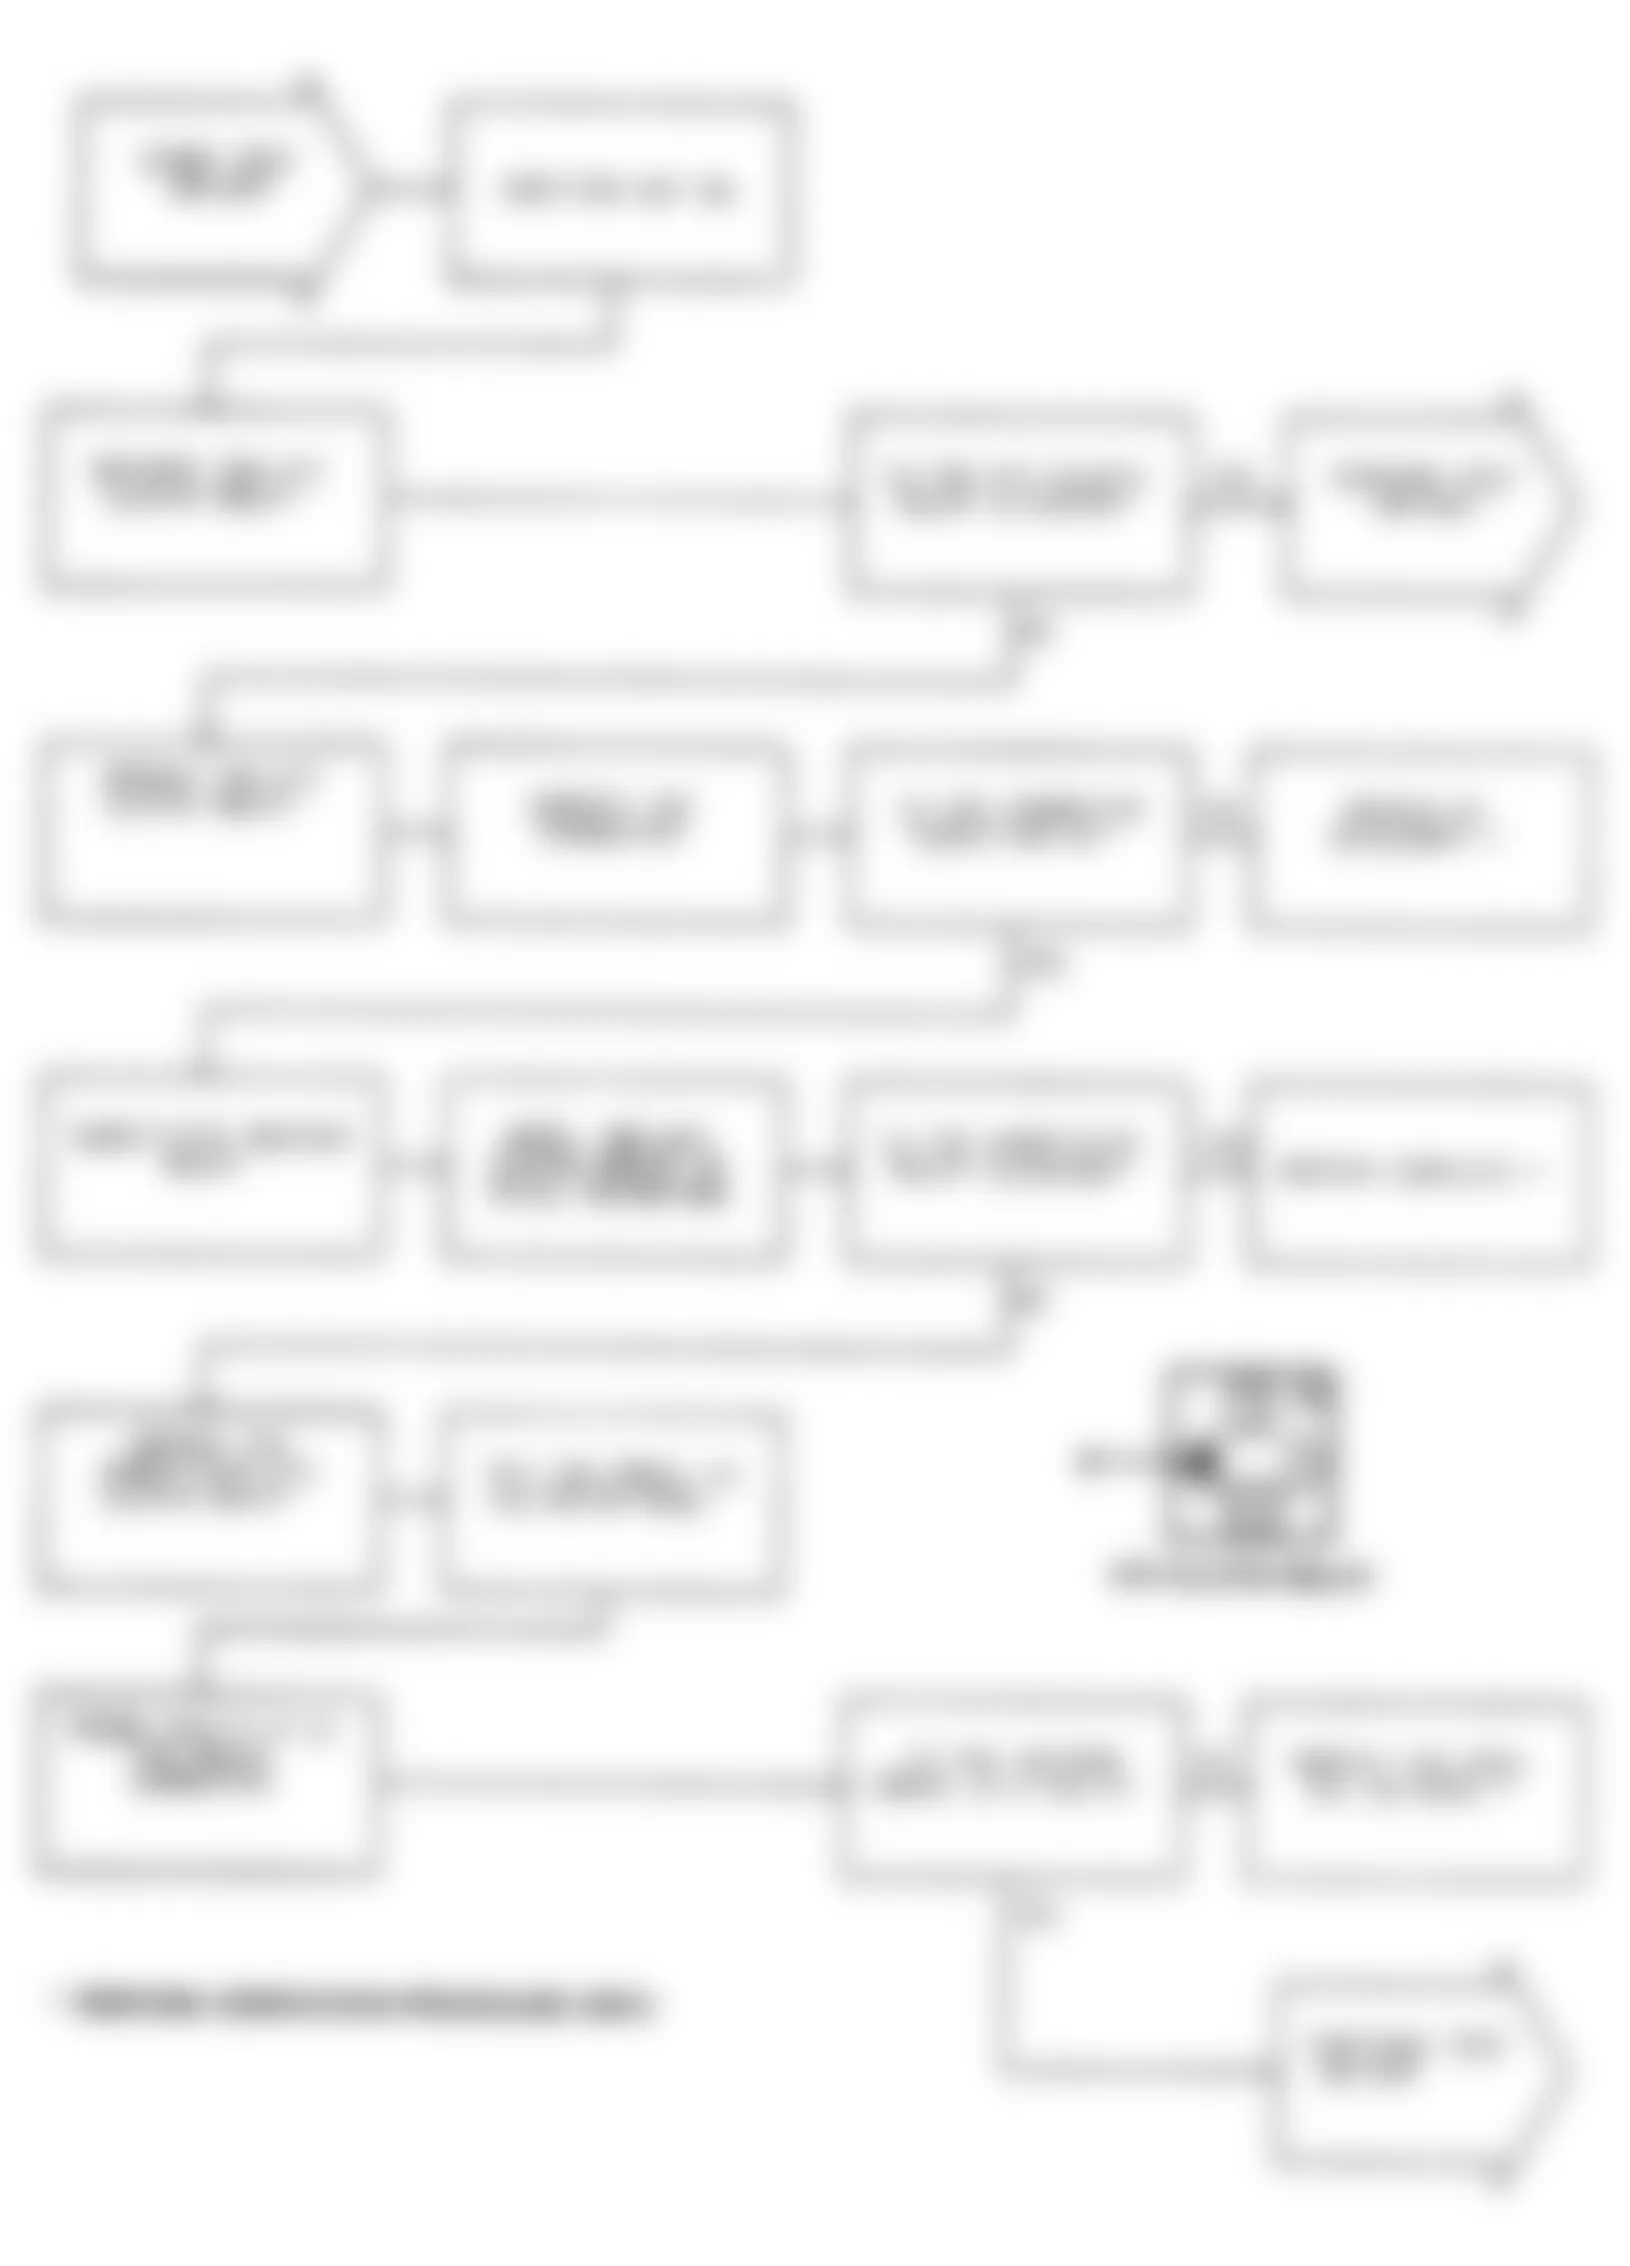 Chrysler Imperial 1991 - Component Locations -  Test DR-25A Code 33: Flowchart (1 of 2)